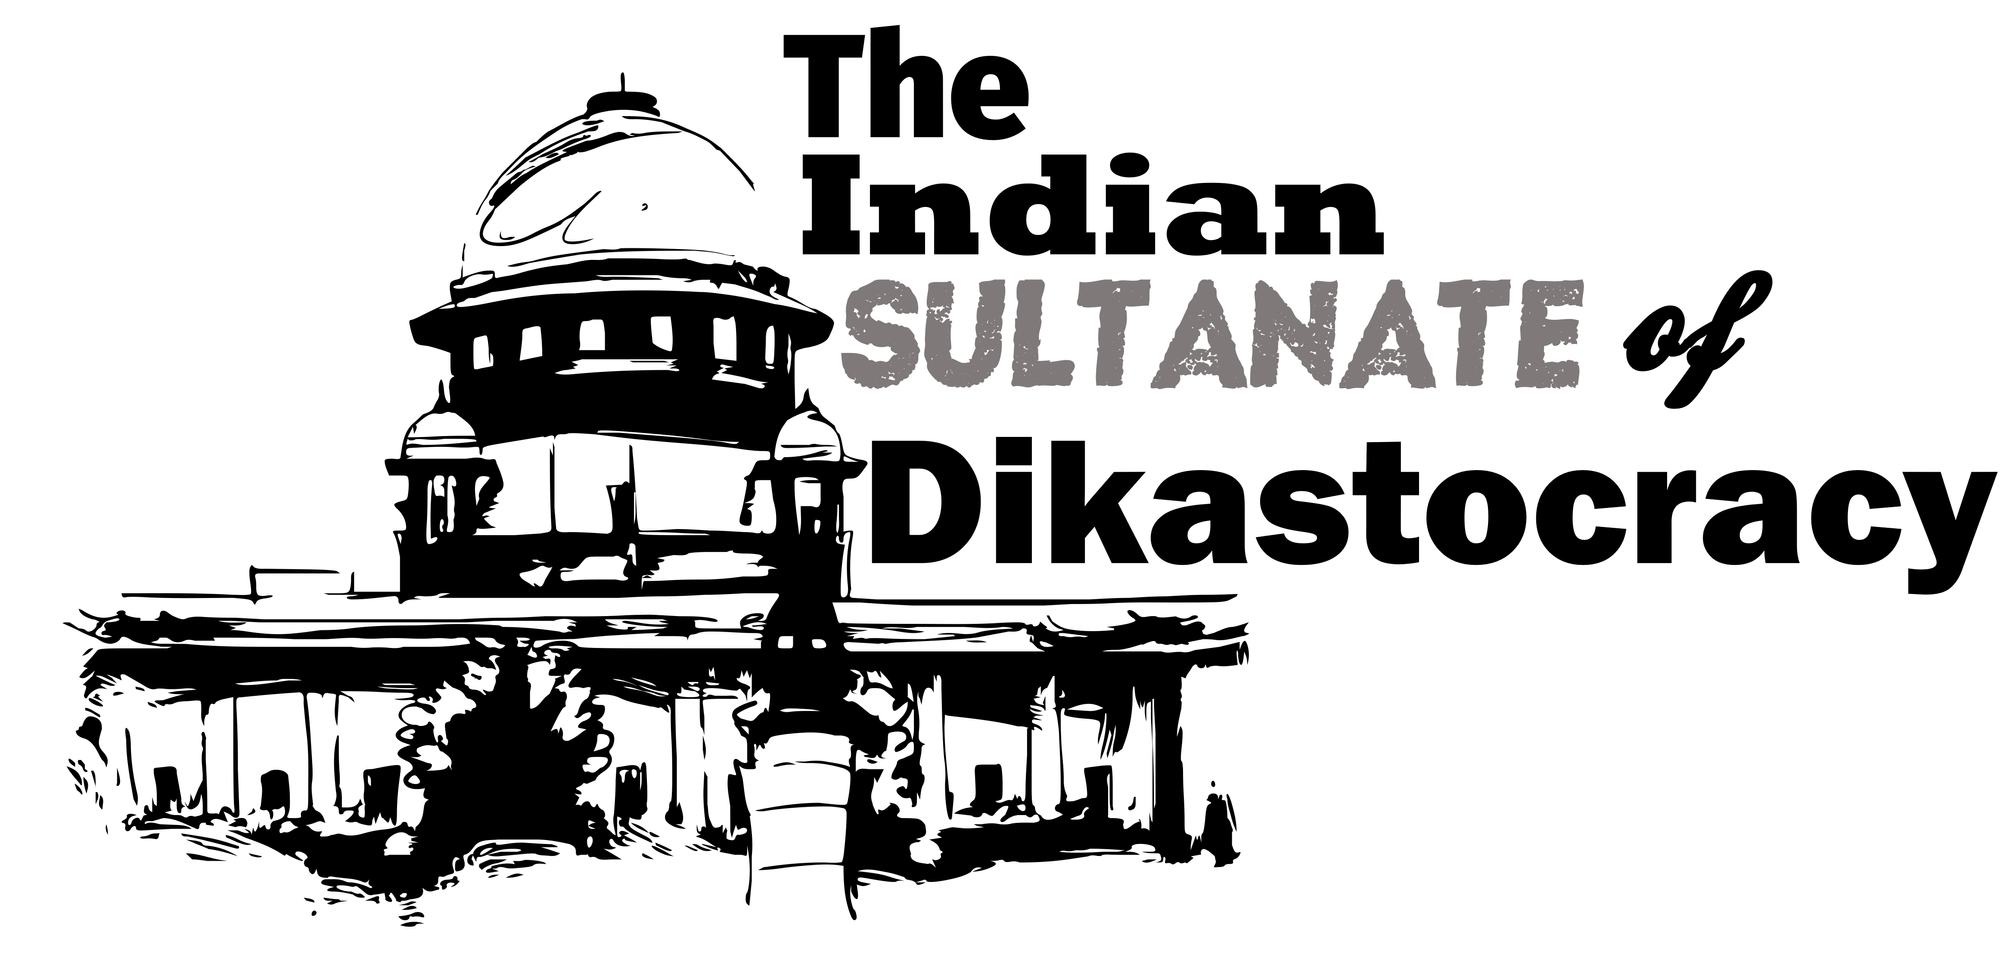 The Indian Sultanate of Dikastocracy